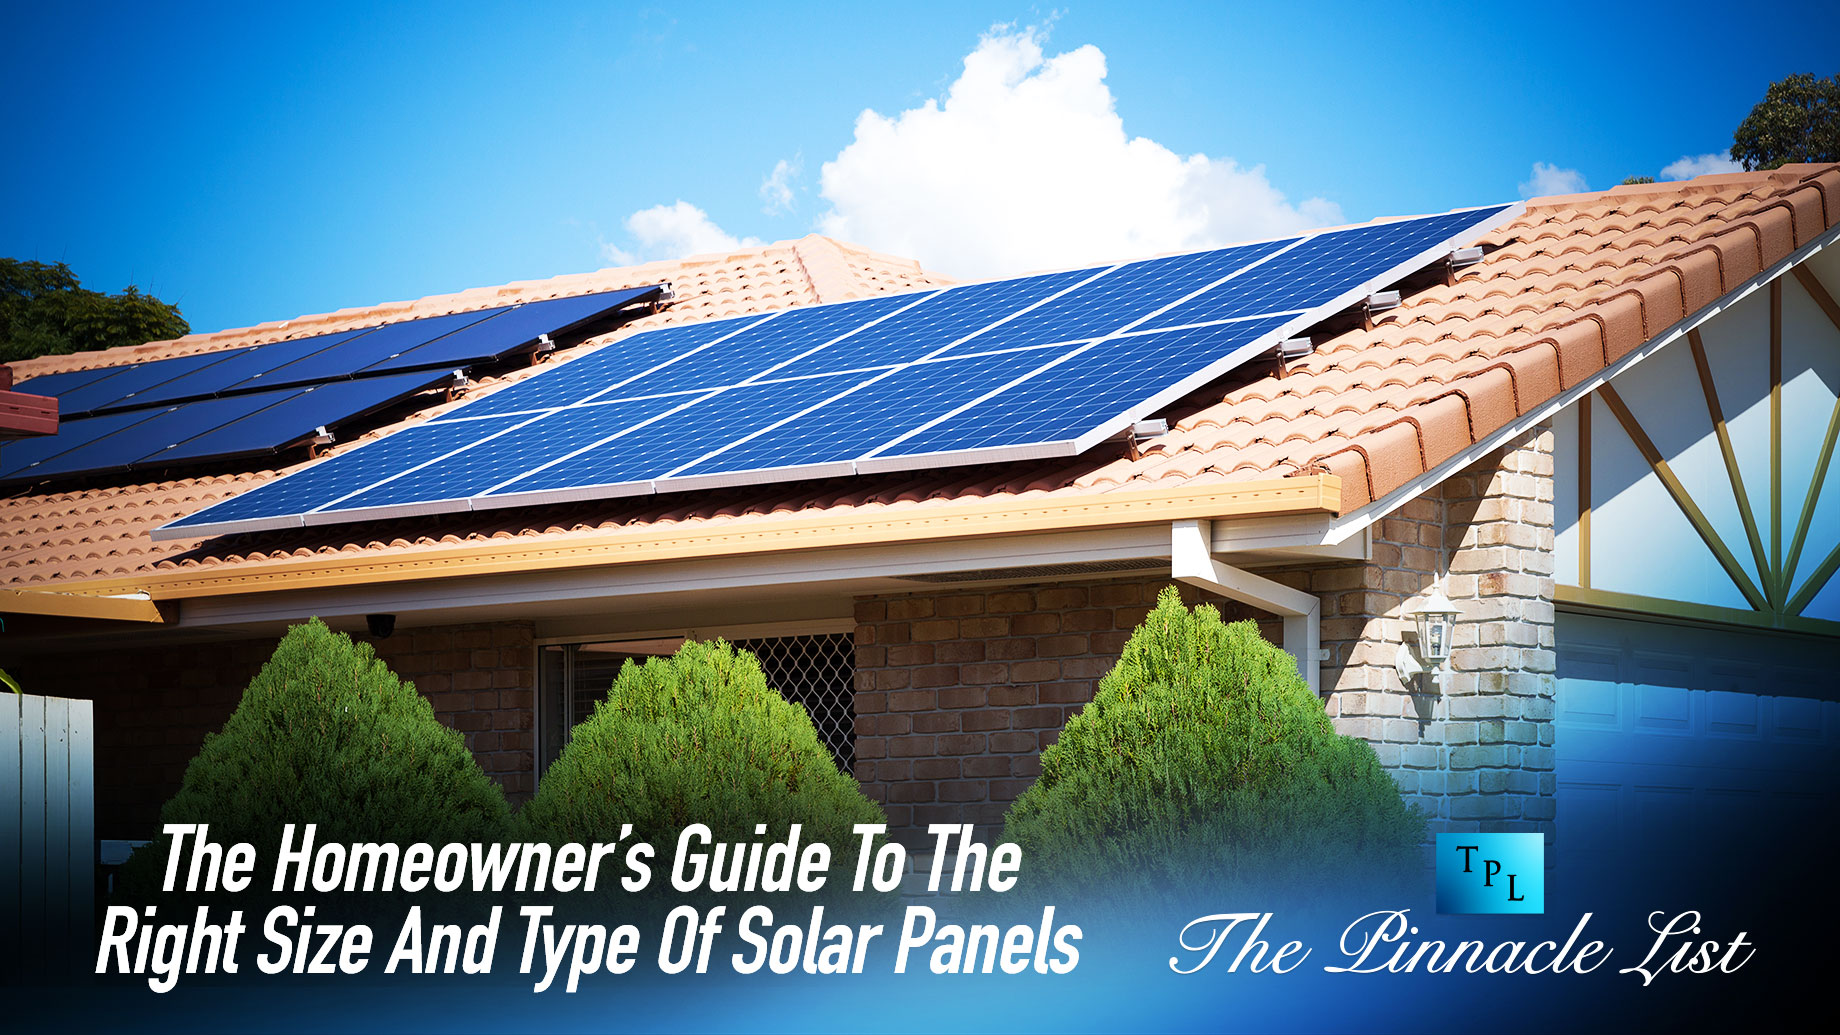 The Homeowner’s Guide To The Right Size And Type Of Solar Panels